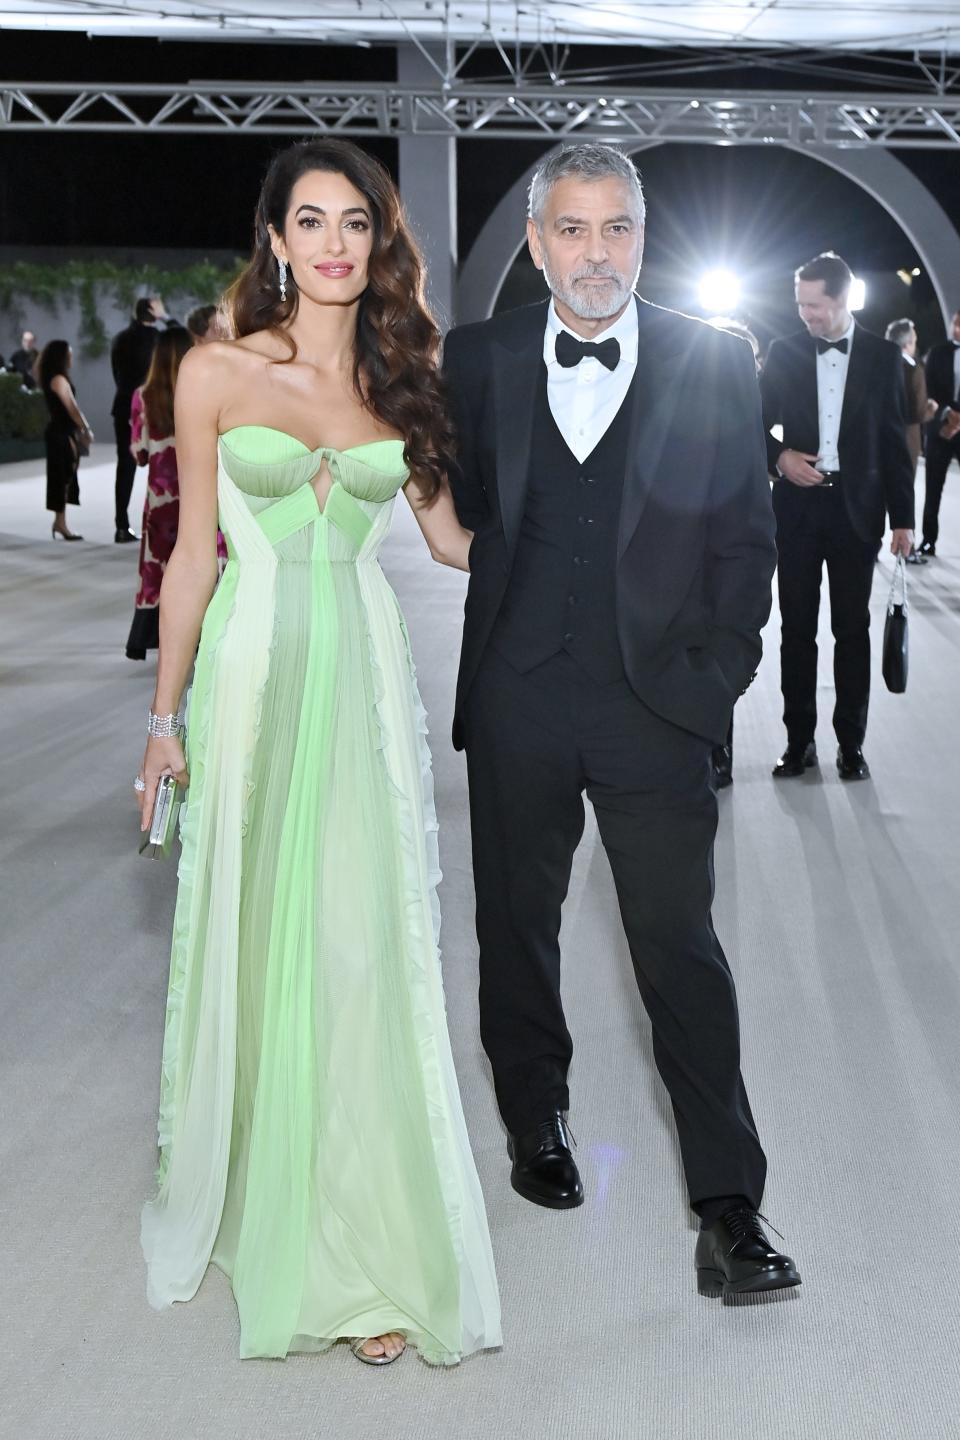 Amal Clooney and George Clooney attend attend the Academy Museum Gala in LA on October 15, 2022.